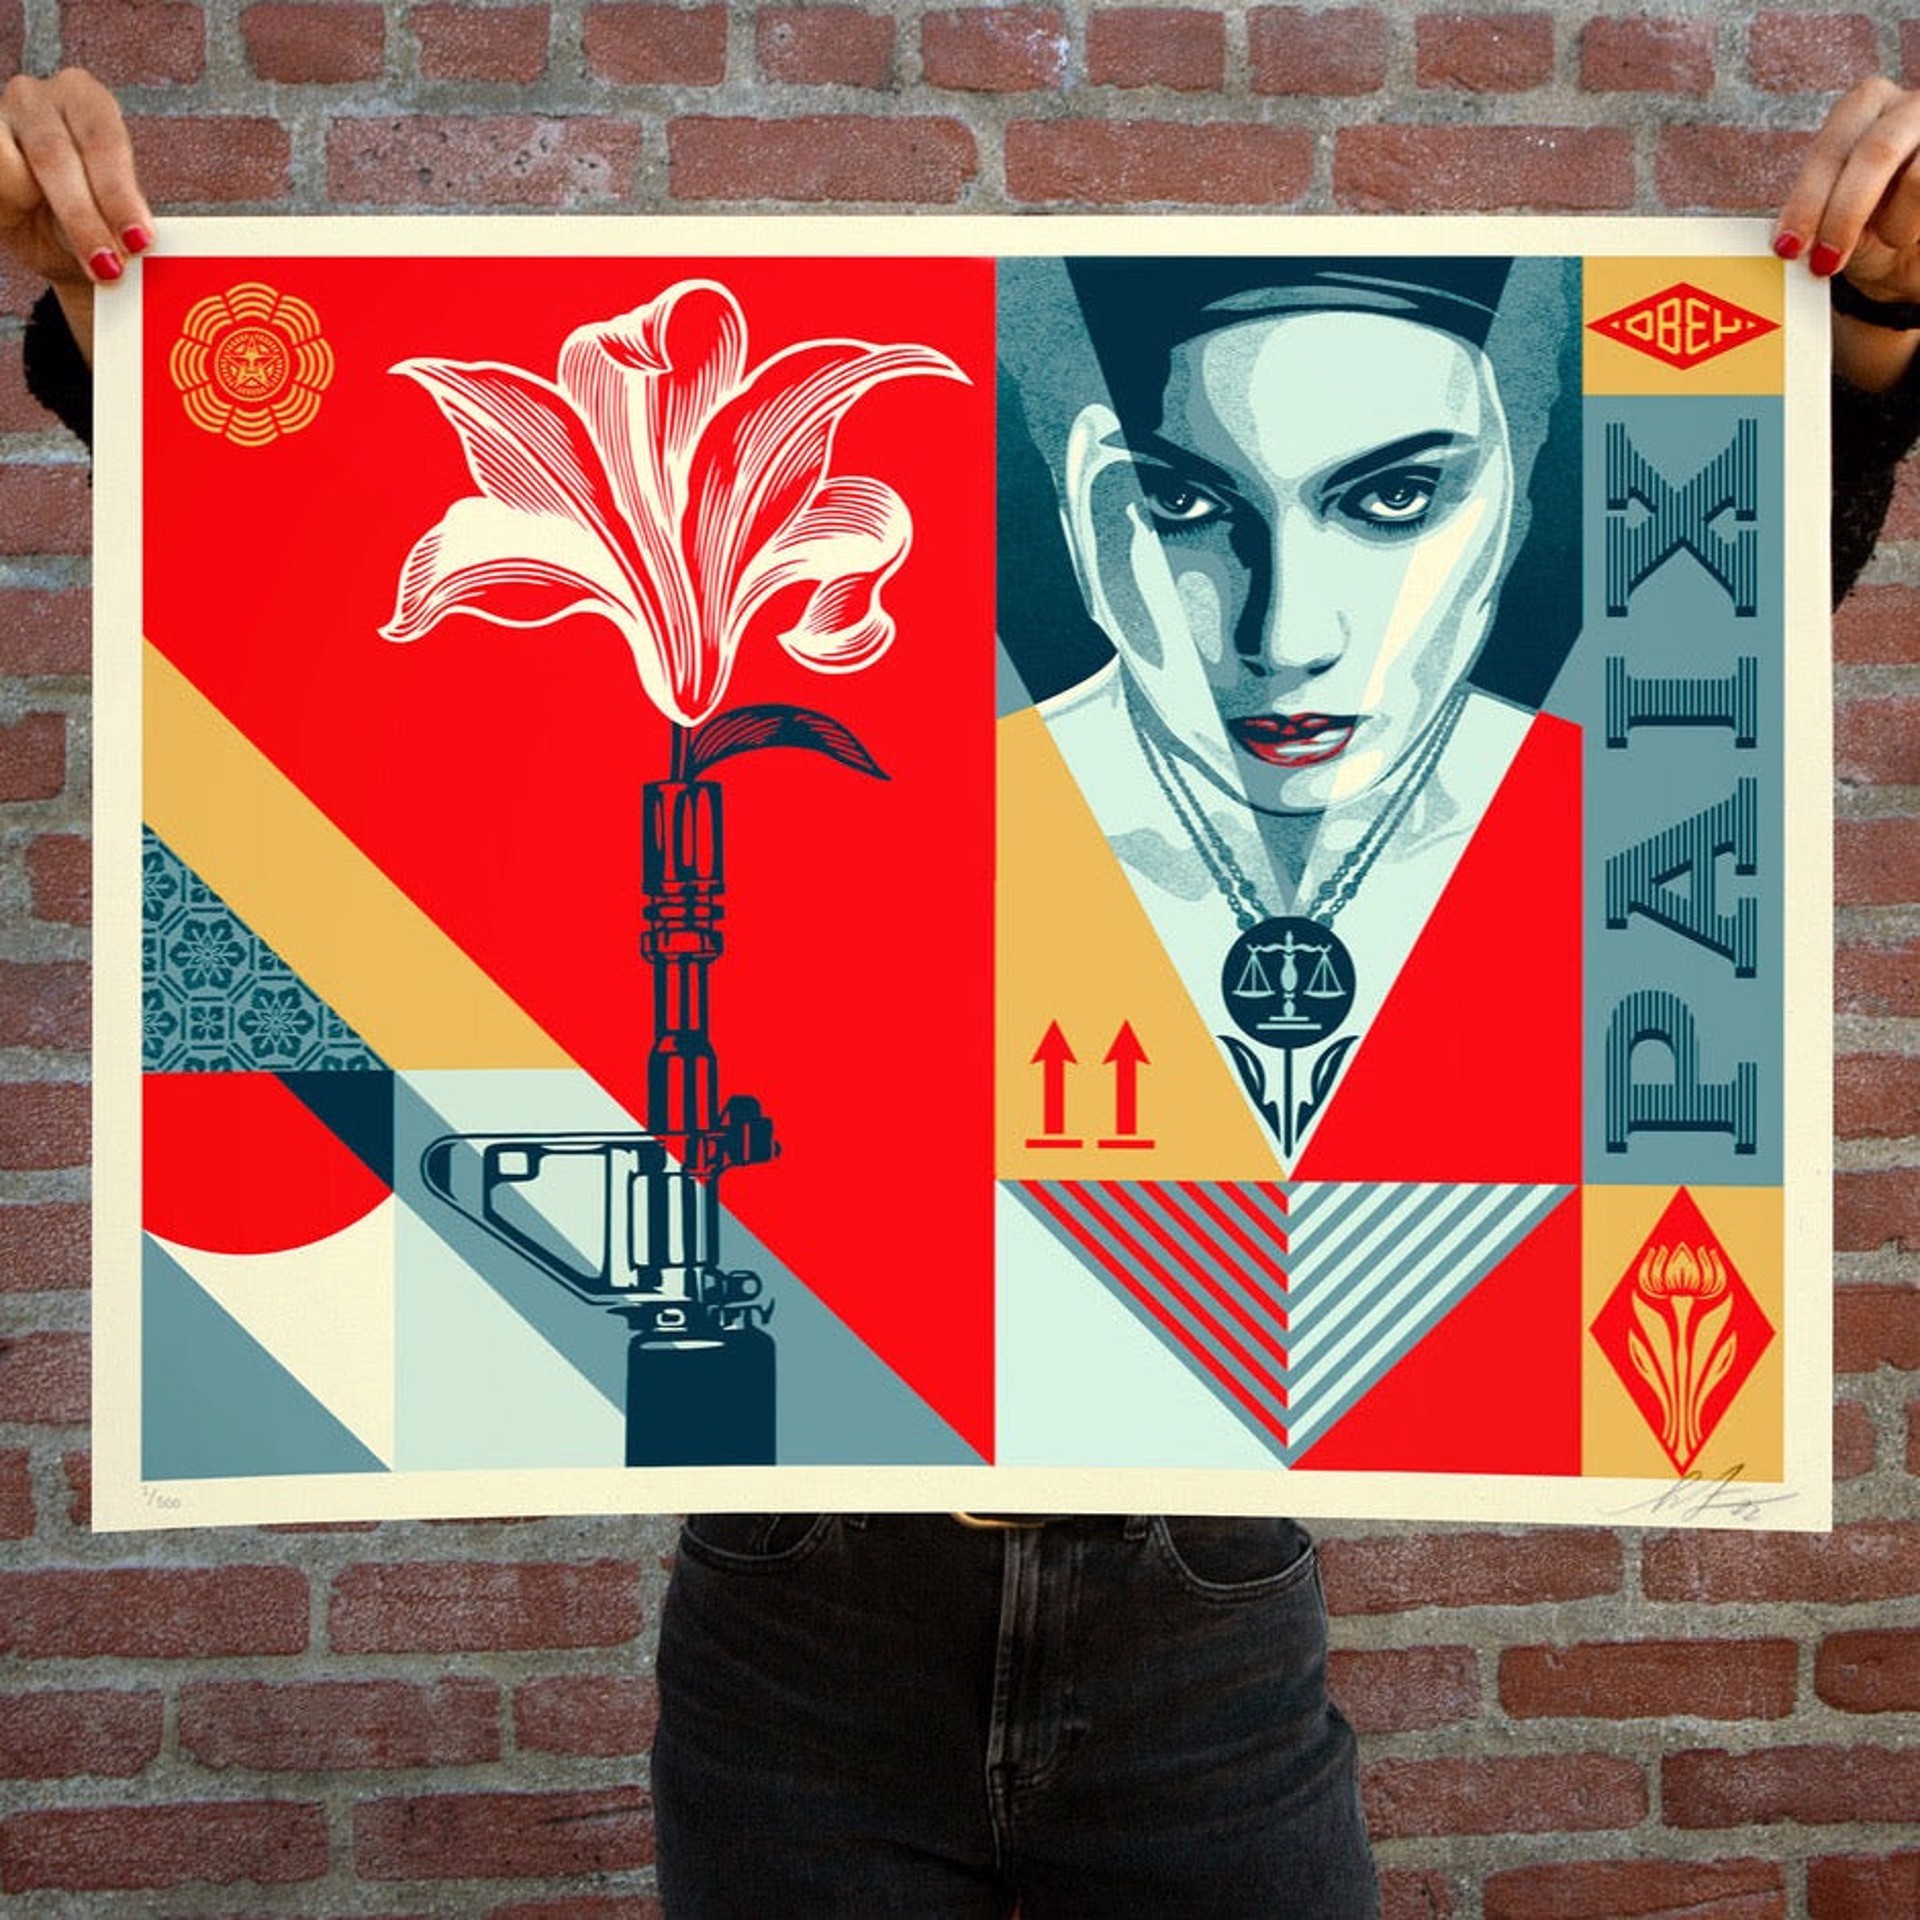 Paix et Justice (ARTIST PROOF) by Shepard Fairey / Limited editions